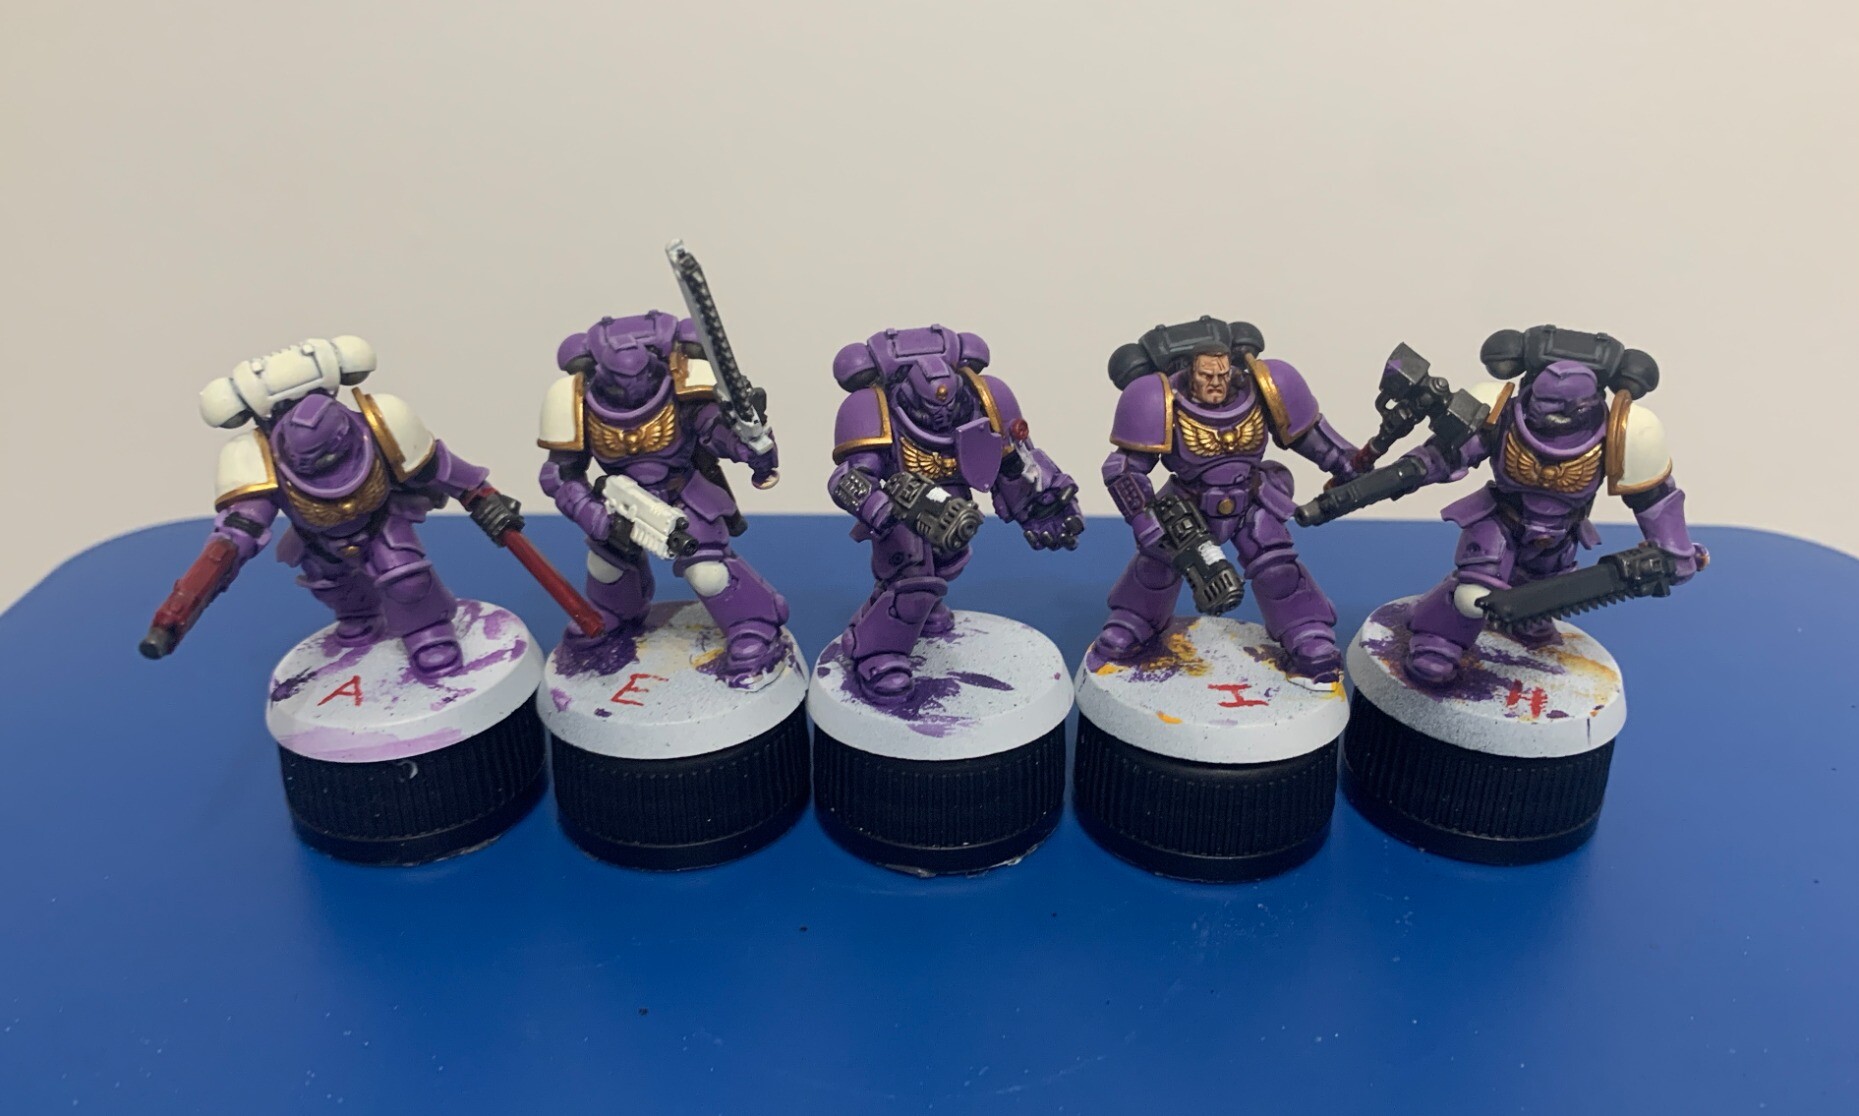 5 space purple space marines in a line with variations of accent colours. The purple is a middle brightness and appears warm, leaning more red than blue. The trim of the armour is gold. From left to right the variations are: White pauldrons with a white backpack and red weapons. Purple backpack, white pauldrons and white weapons. Purple backpack, purple pauldrons and back weapons. Black backpack, purple pauldrons and black weapons. And black backpack, purple pauldrons and black weapons.  The models are sat on black bottle caps on top of a blue plastic lid.